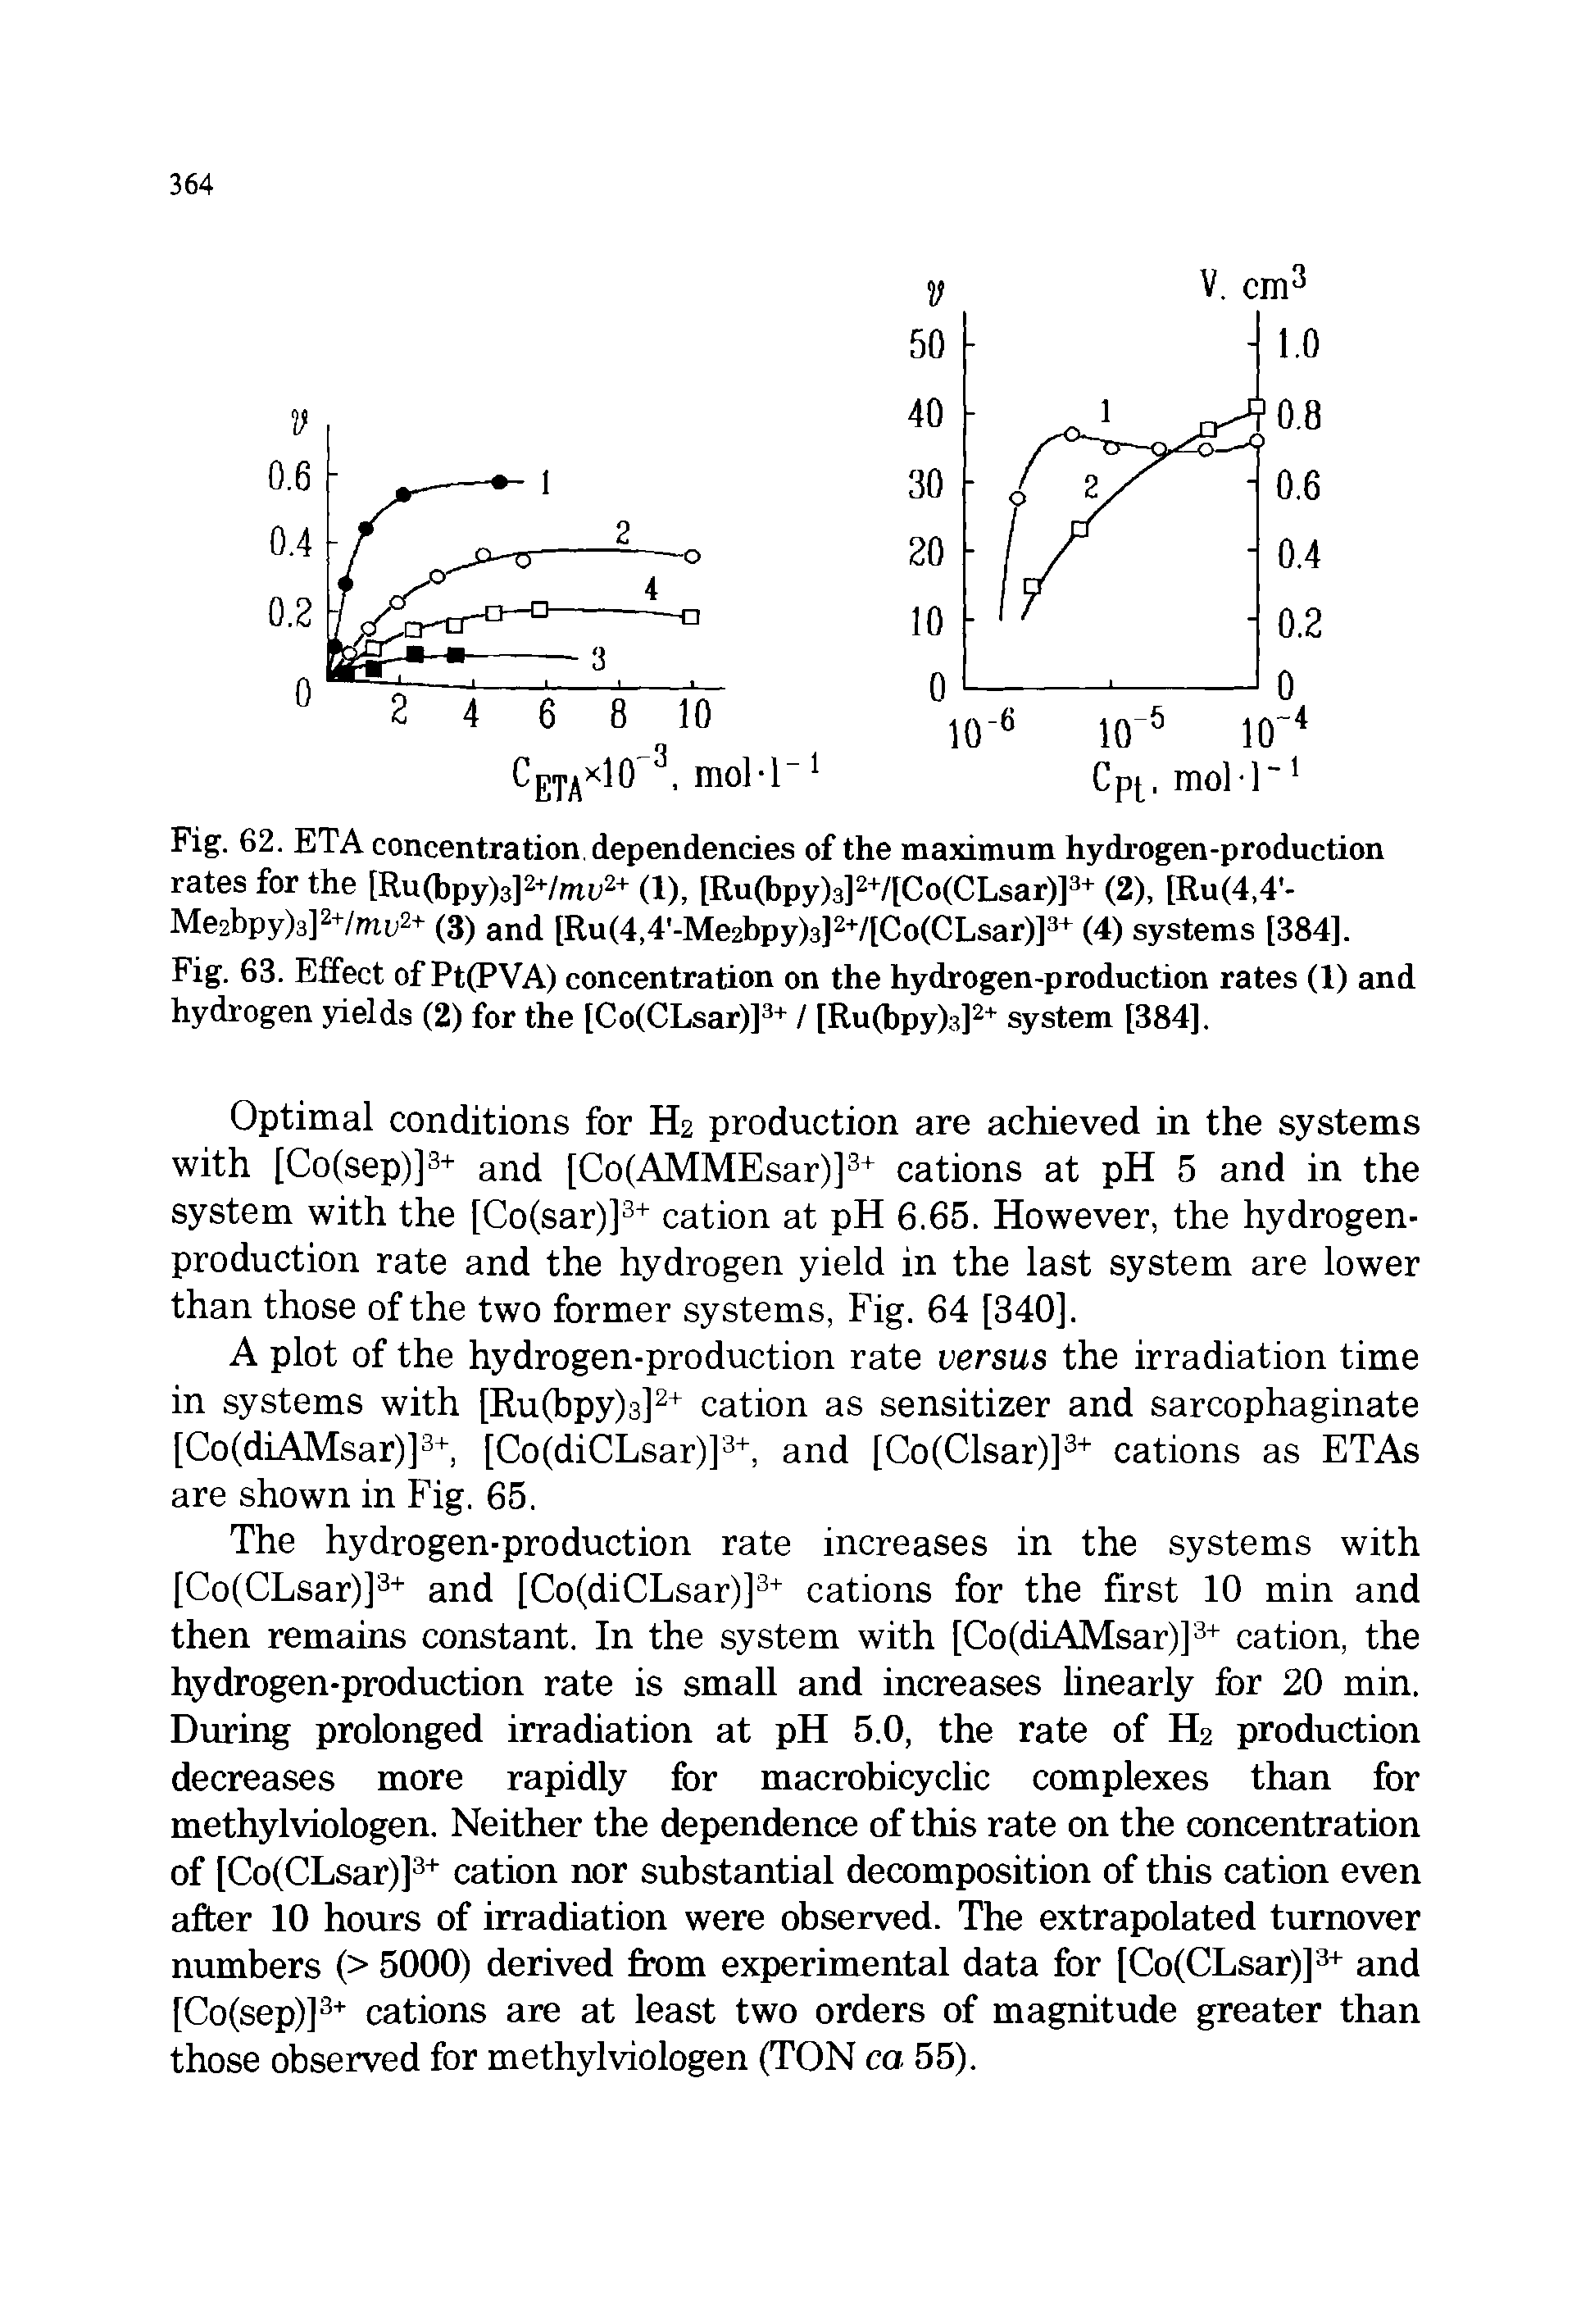 Fig. 63. Effect of Pt(PVA) concentration on the hydrogen-production rates (1) and hydrogen yields (2) for the [Co(CLsar)] + / [Ru(bpy)3] system [384].